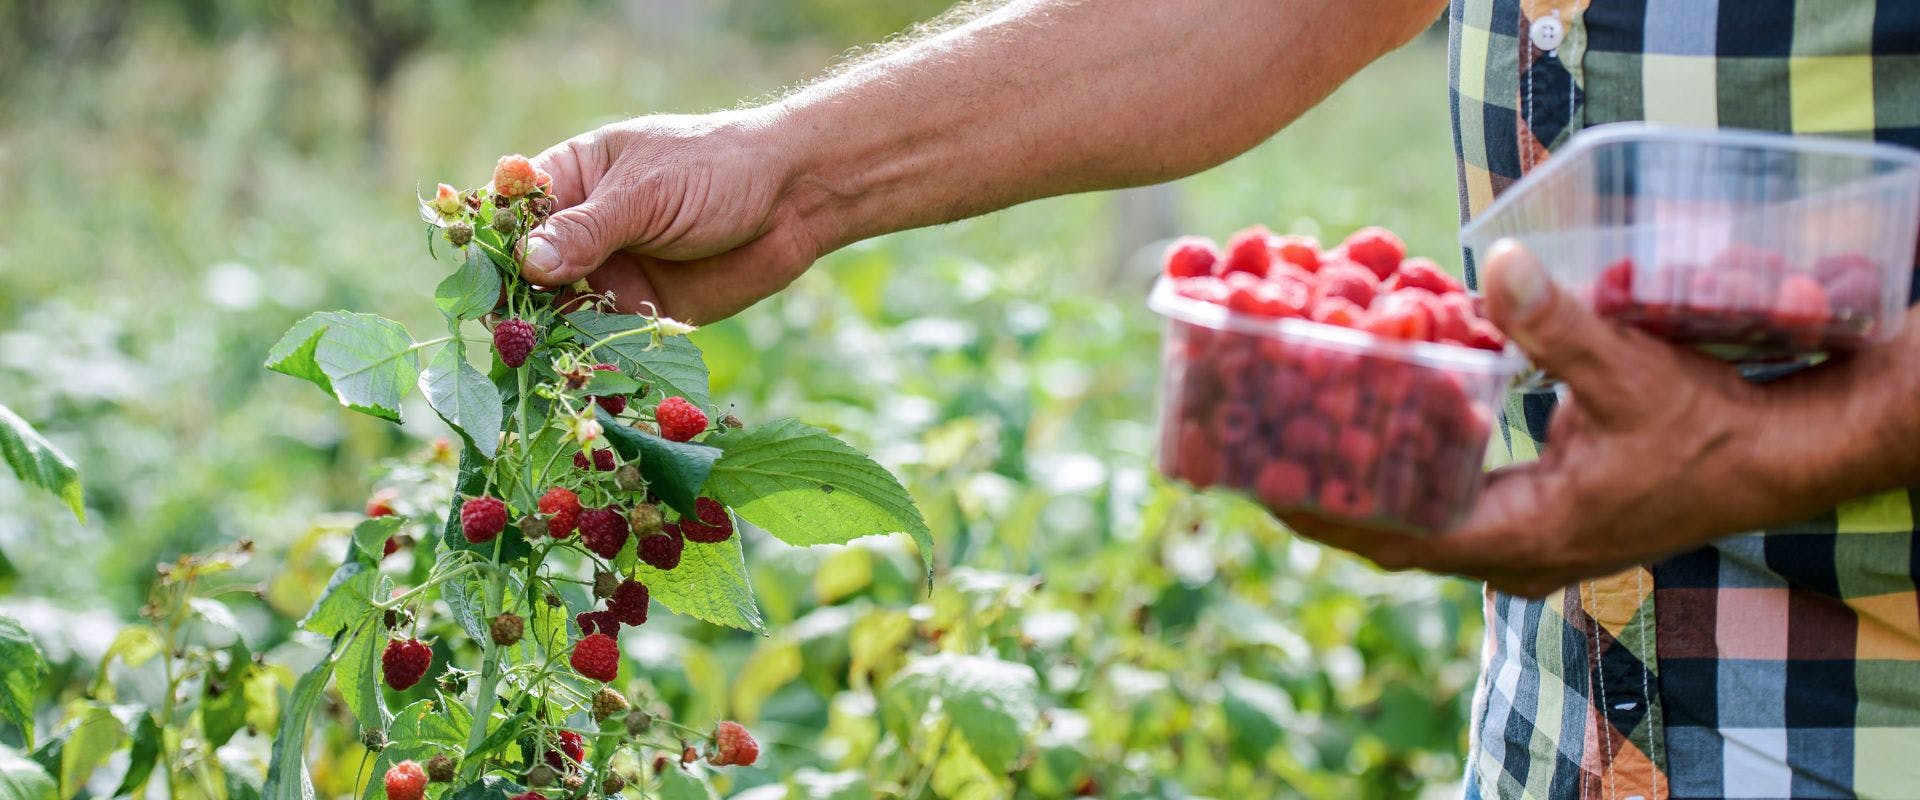 Raspberries being picked from farm